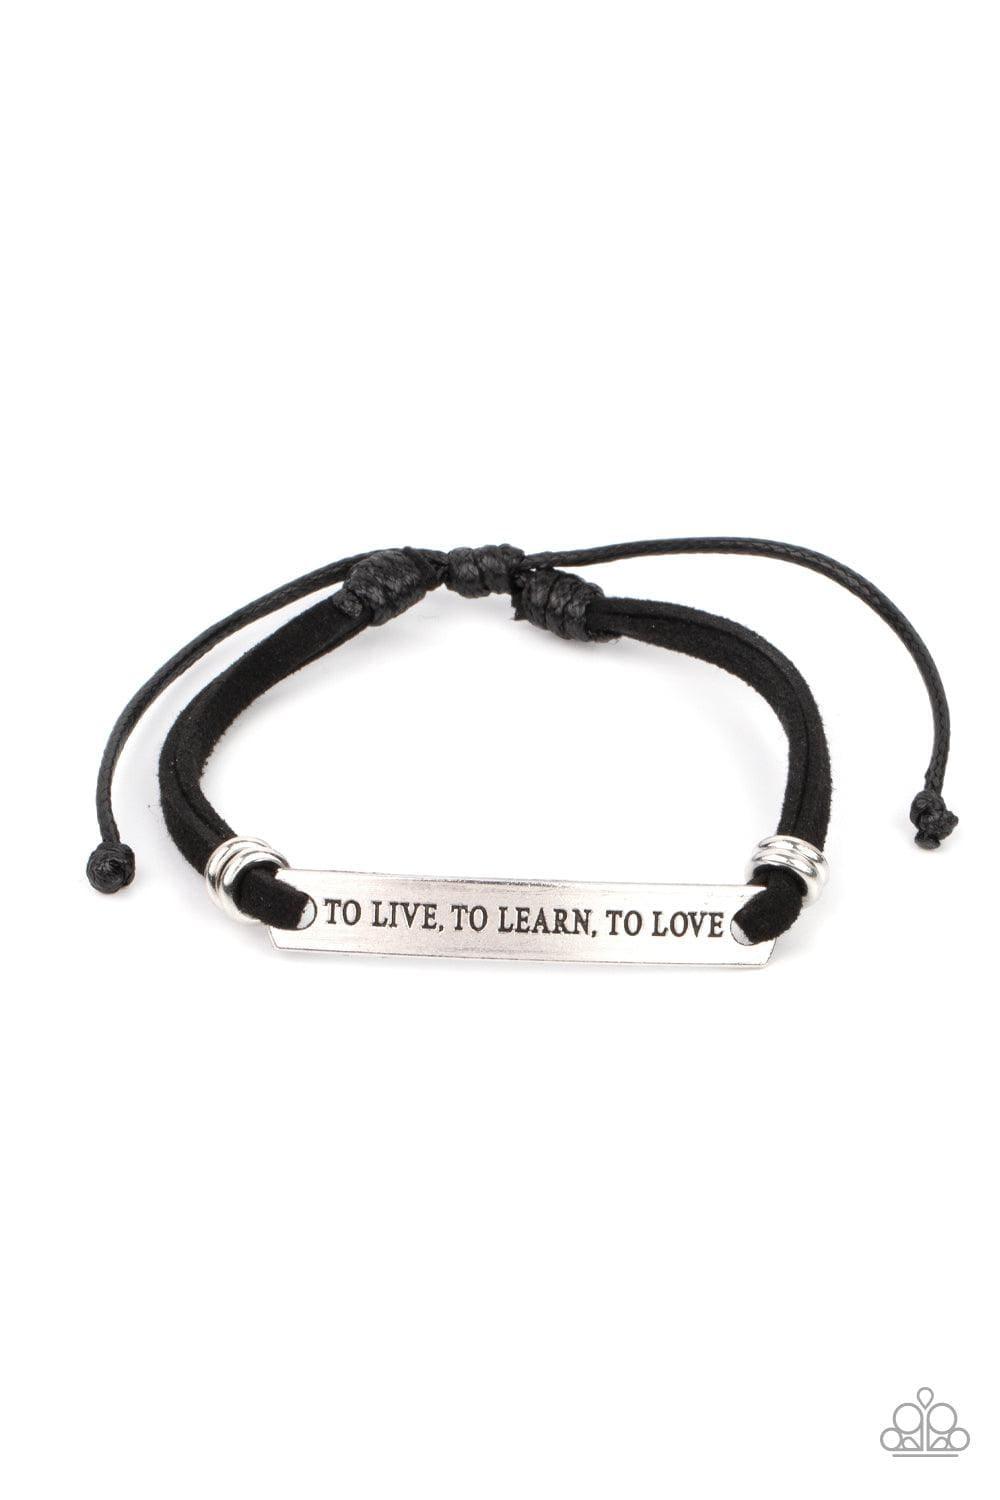 Paparazzi Accessories - To Live, To Learn, To Love - Black Urban Bracelet - Bling by JessieK